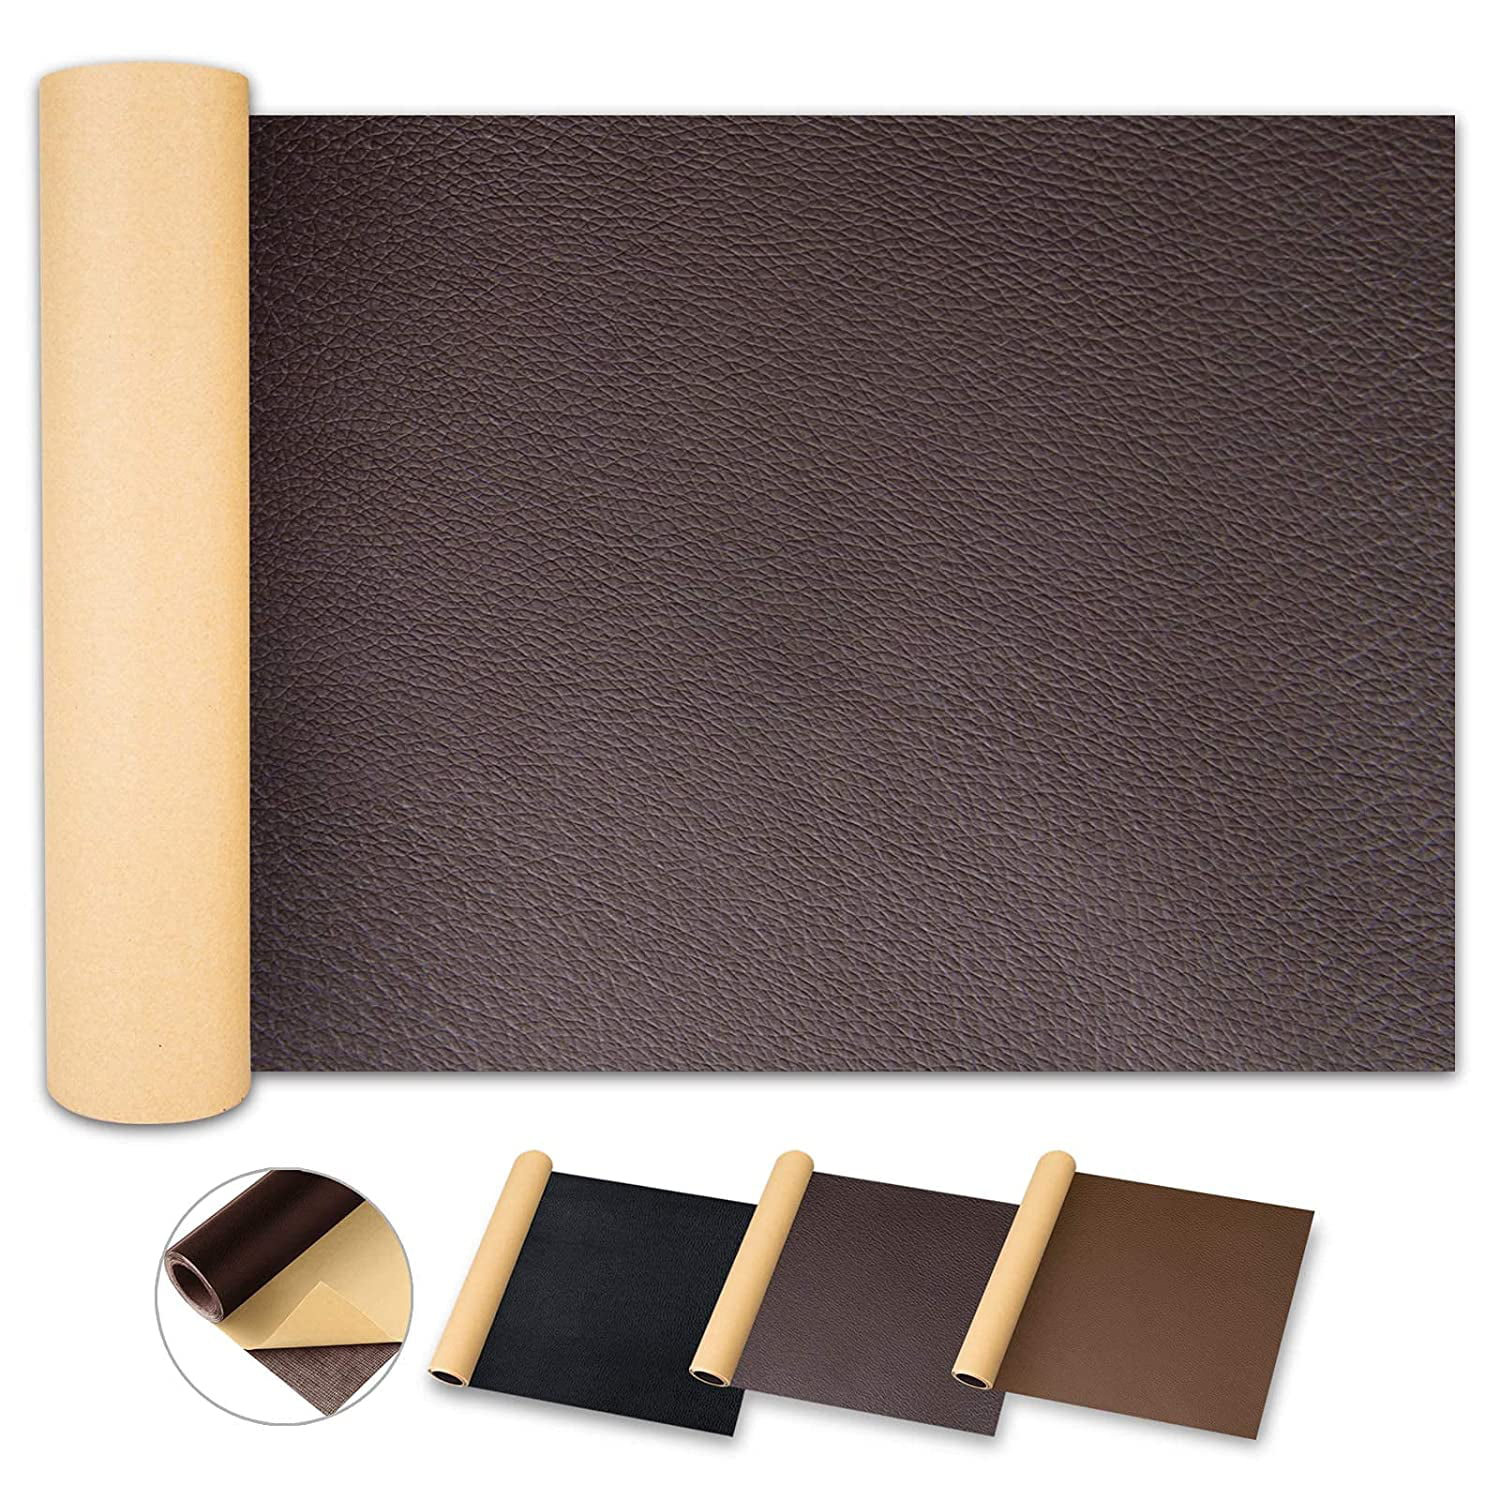 Large Leather Repair Patch For Couches, Repair Large Tear Leather Couch